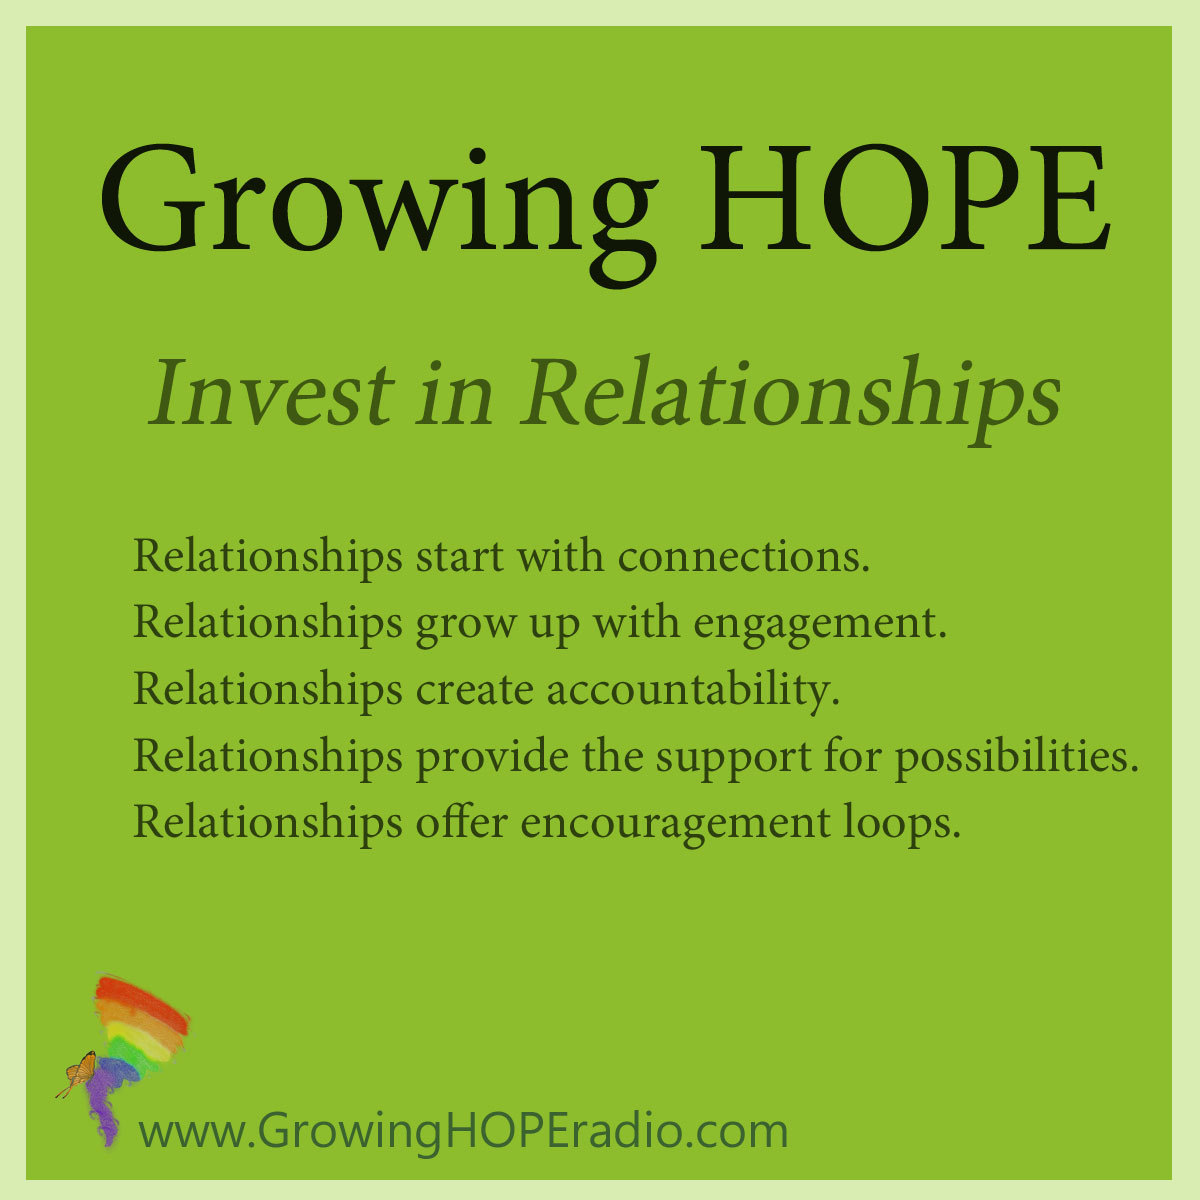 #GrowingHOPE 5 points - relationships